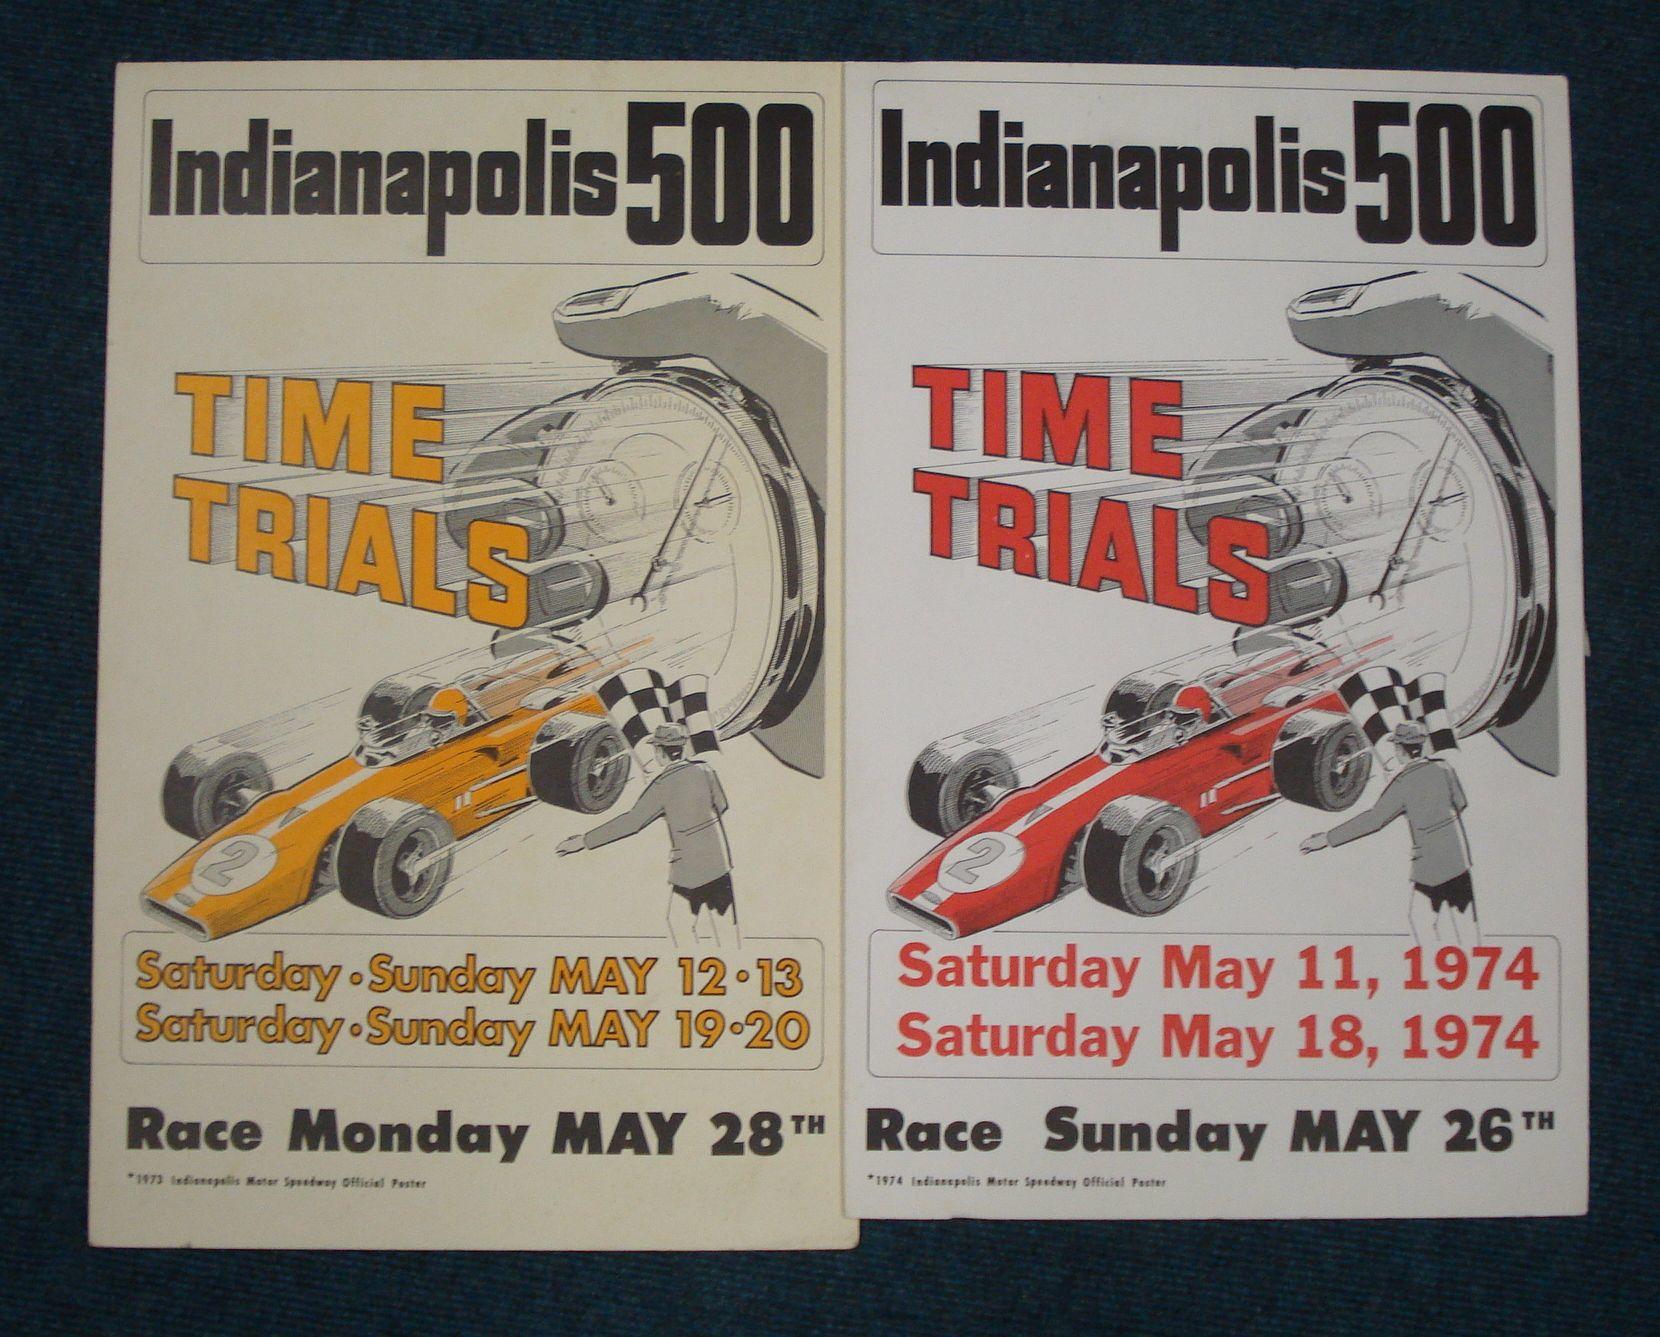 Bonhams Cars Two Indianapolis 500 Time Trials posters, 1973 and 1974,